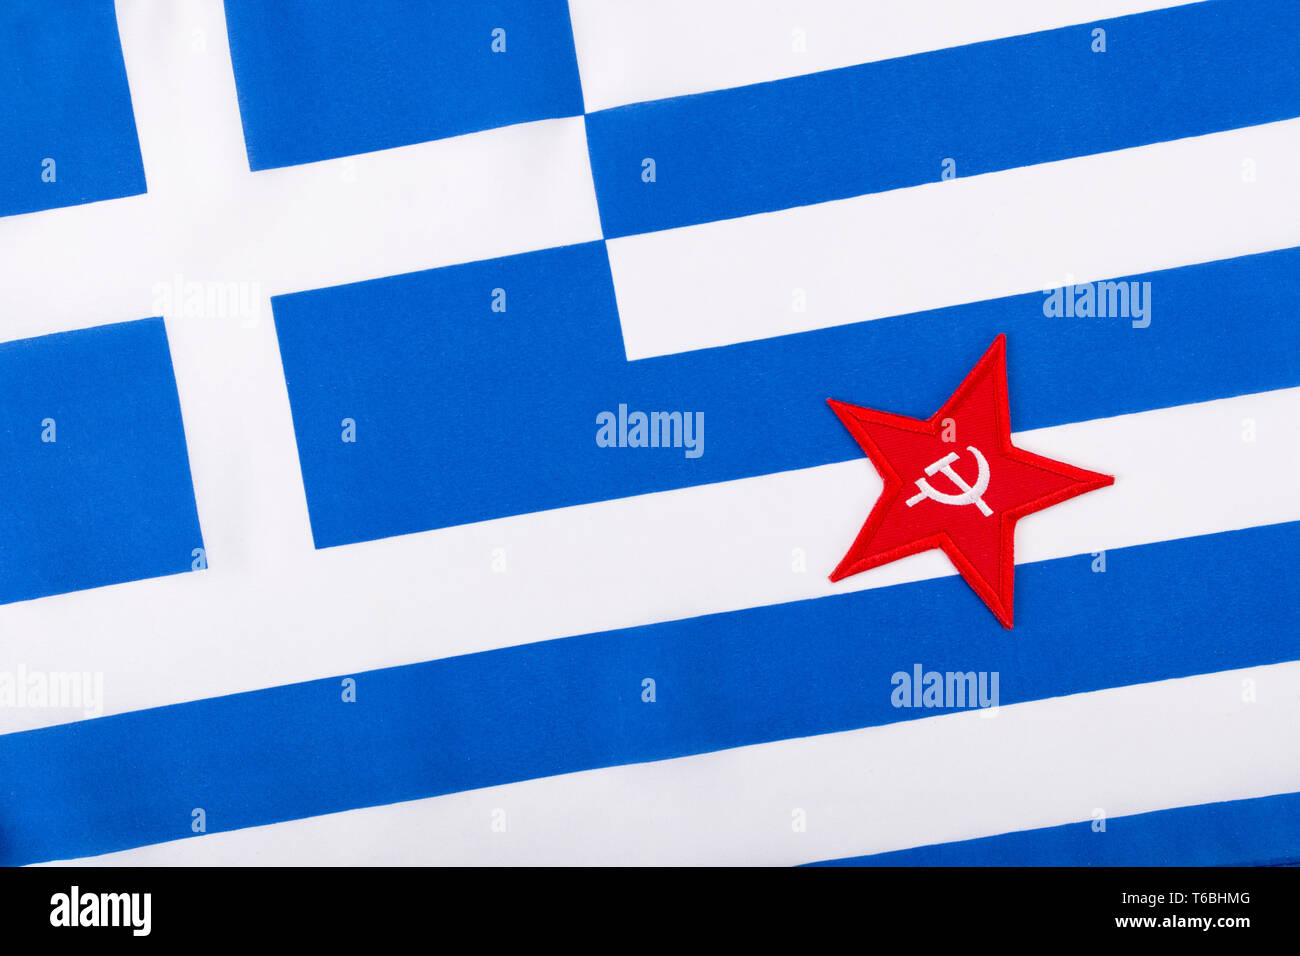 Red Star Hammer and Sickle badge with Greek flag. For Socialist election wins in Greek general election. Greek communists hammer & sickle, red star. Stock Photo